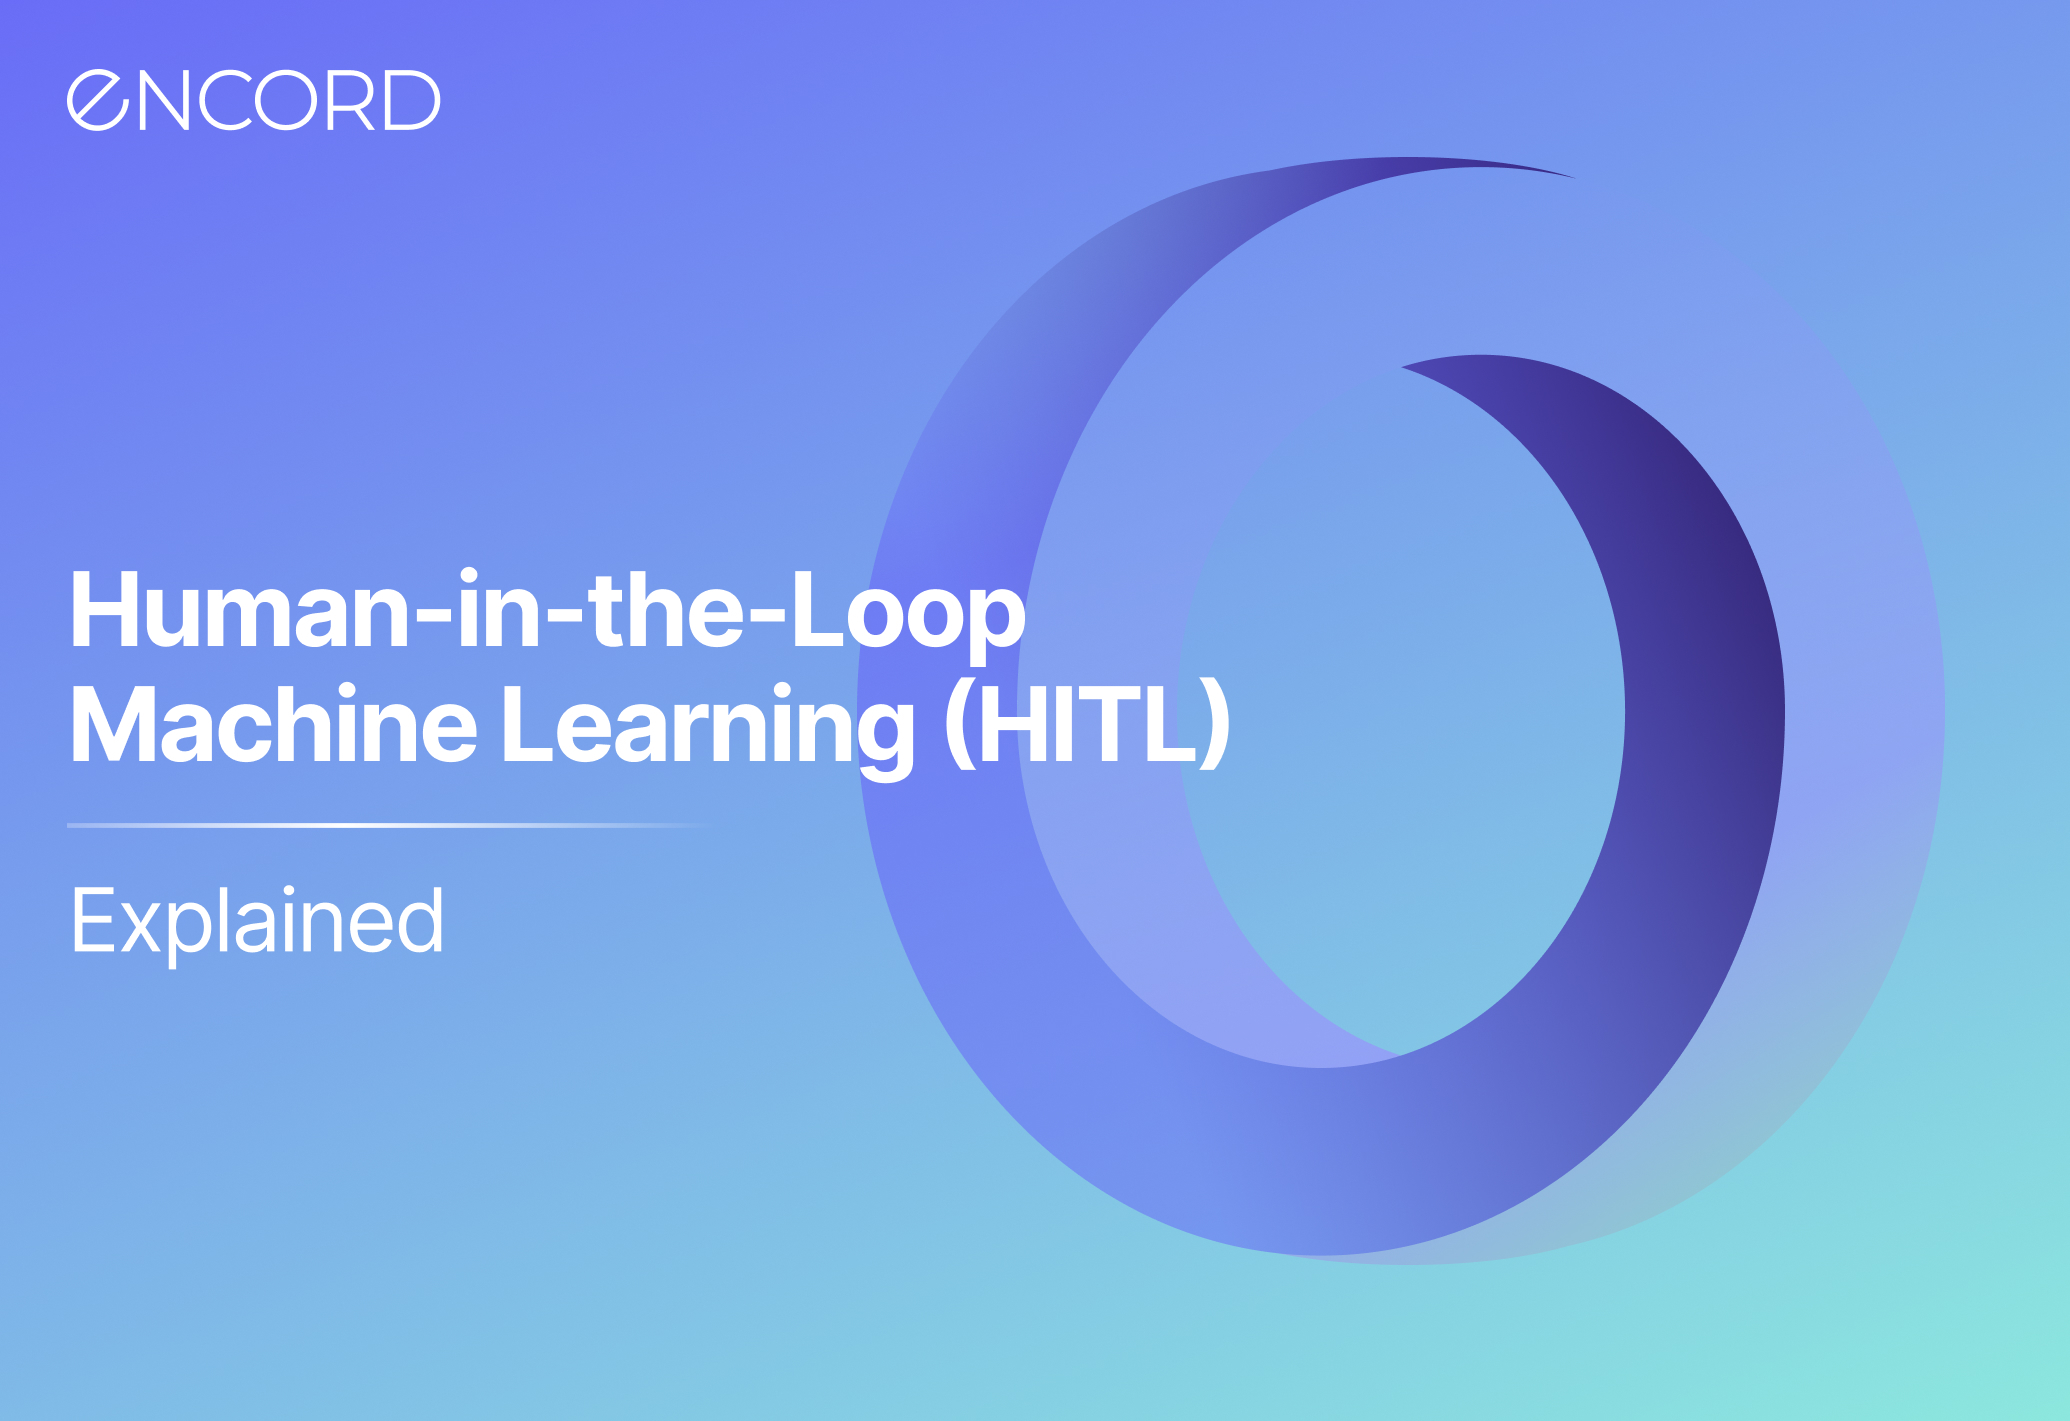 Human in the Loop - Machine Learning - Definition u0026 Examples | Encord